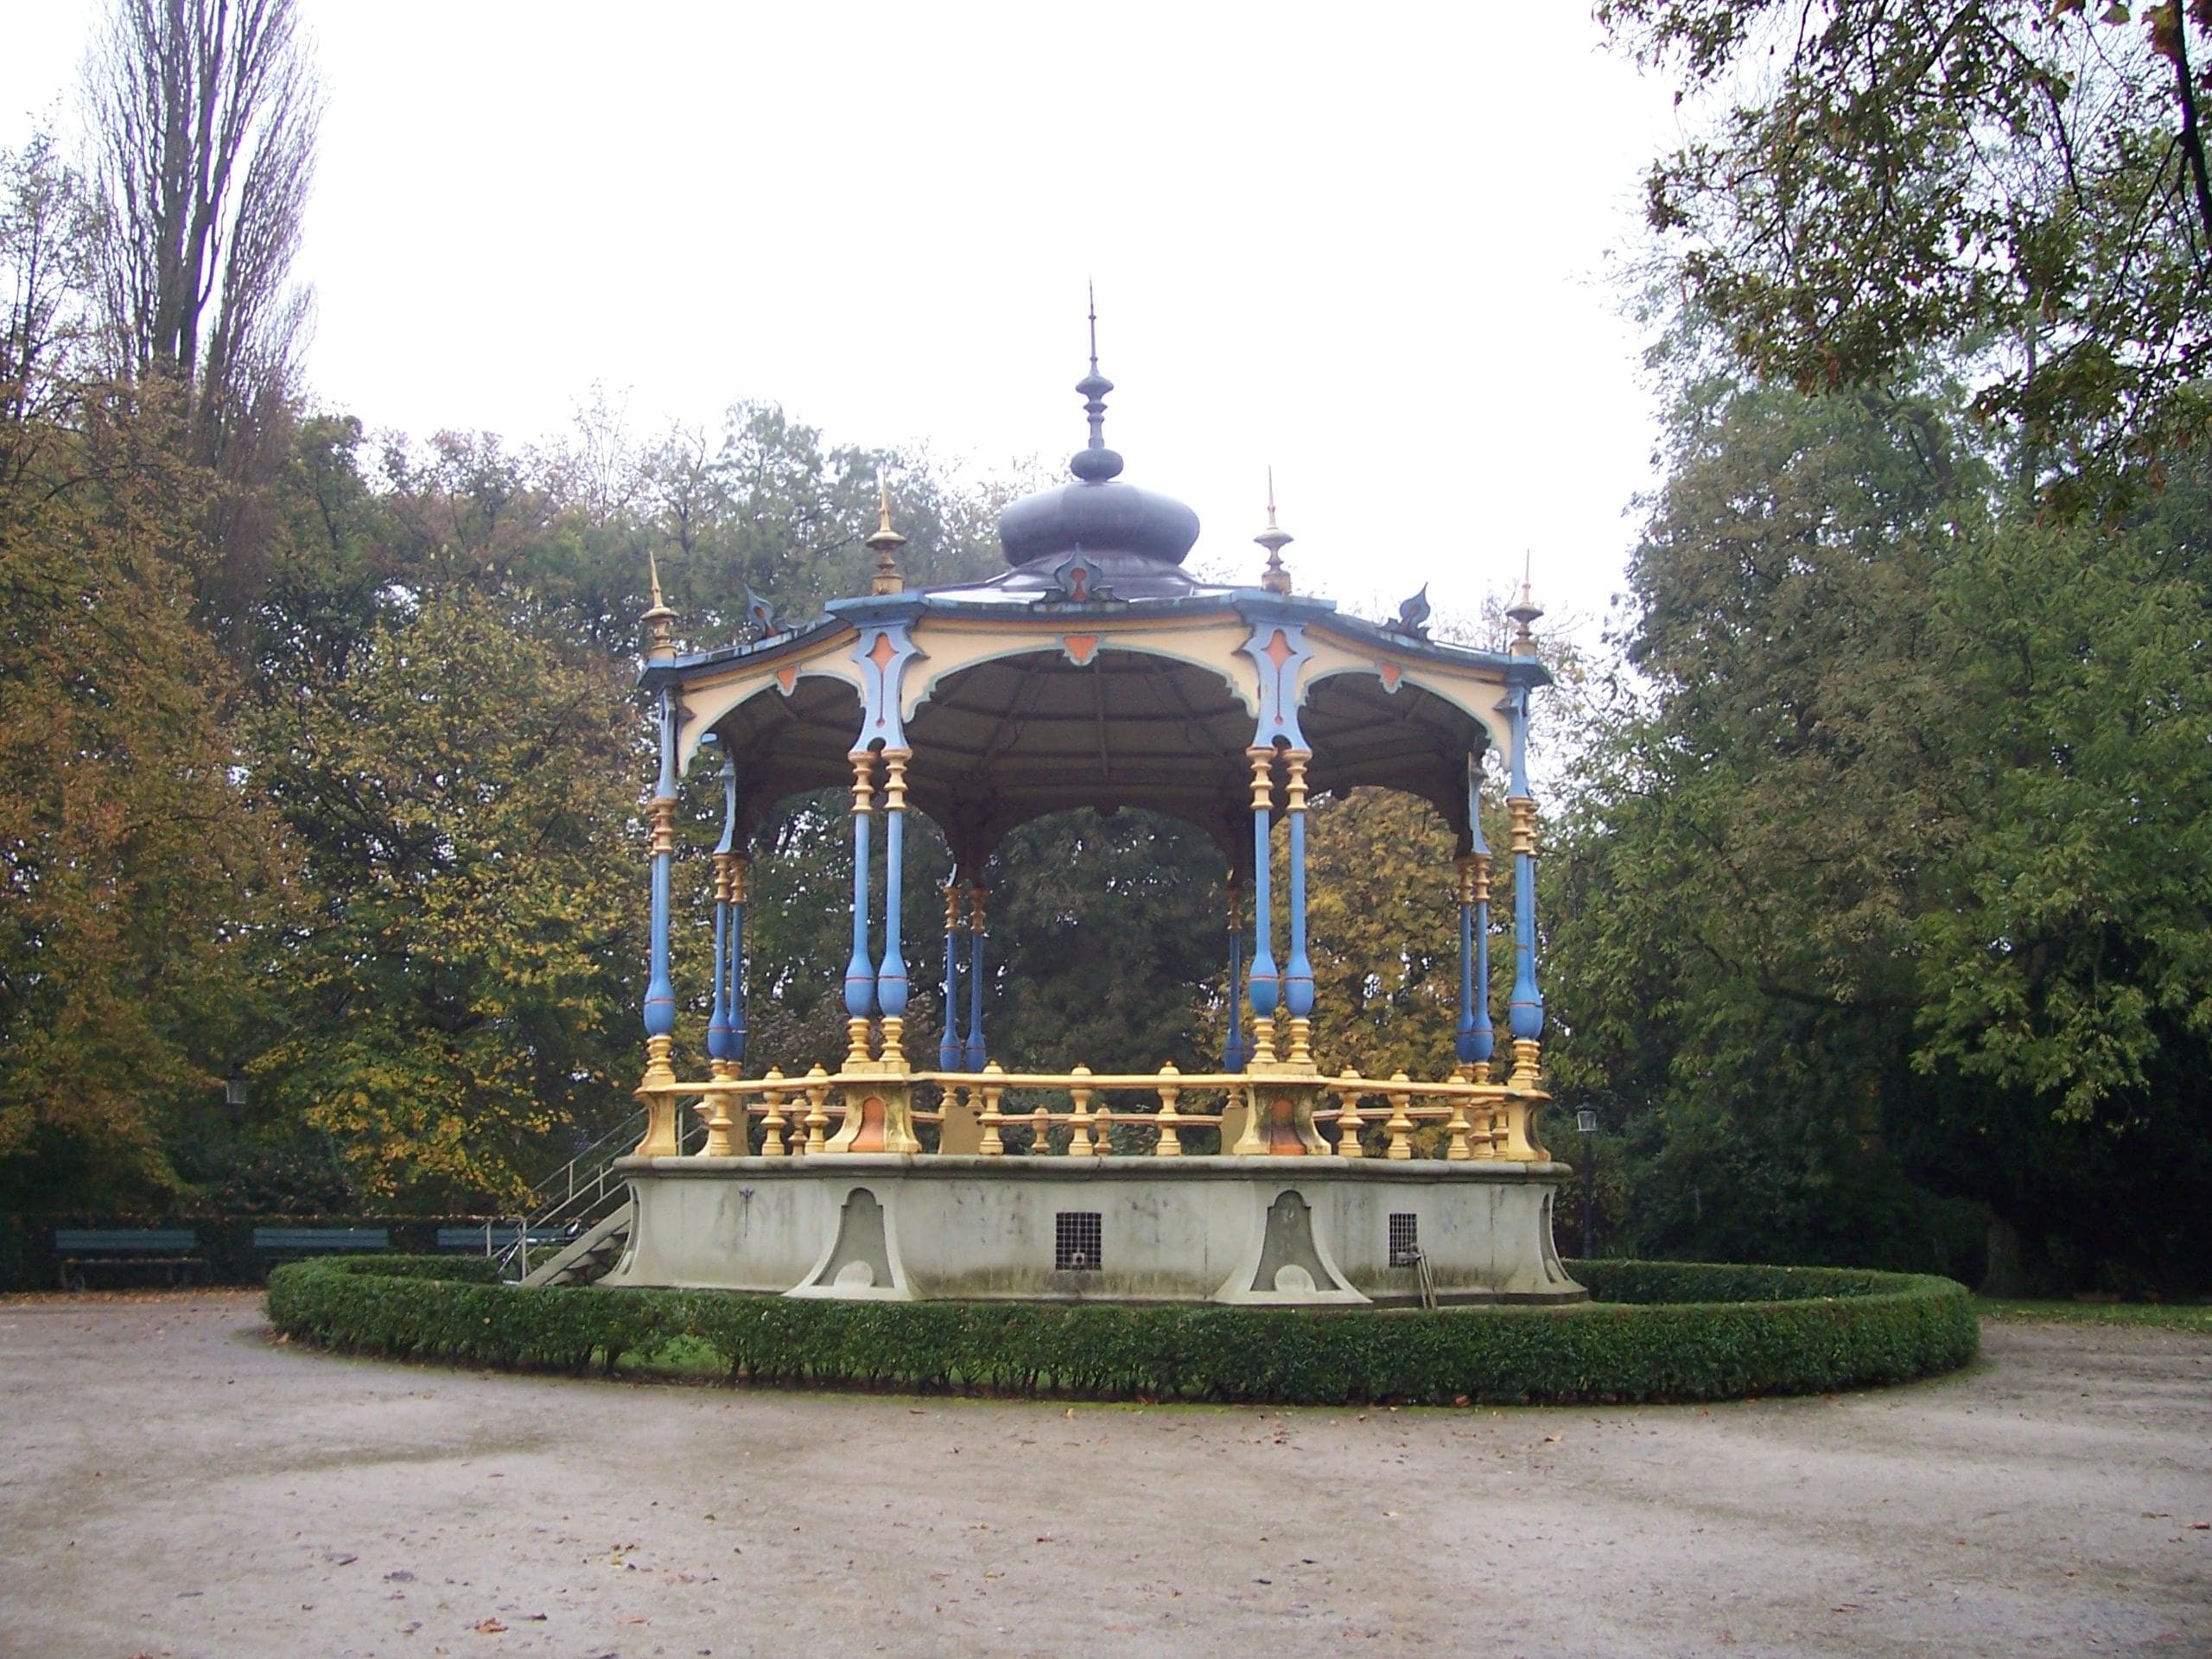 Bandstand in Astridpark